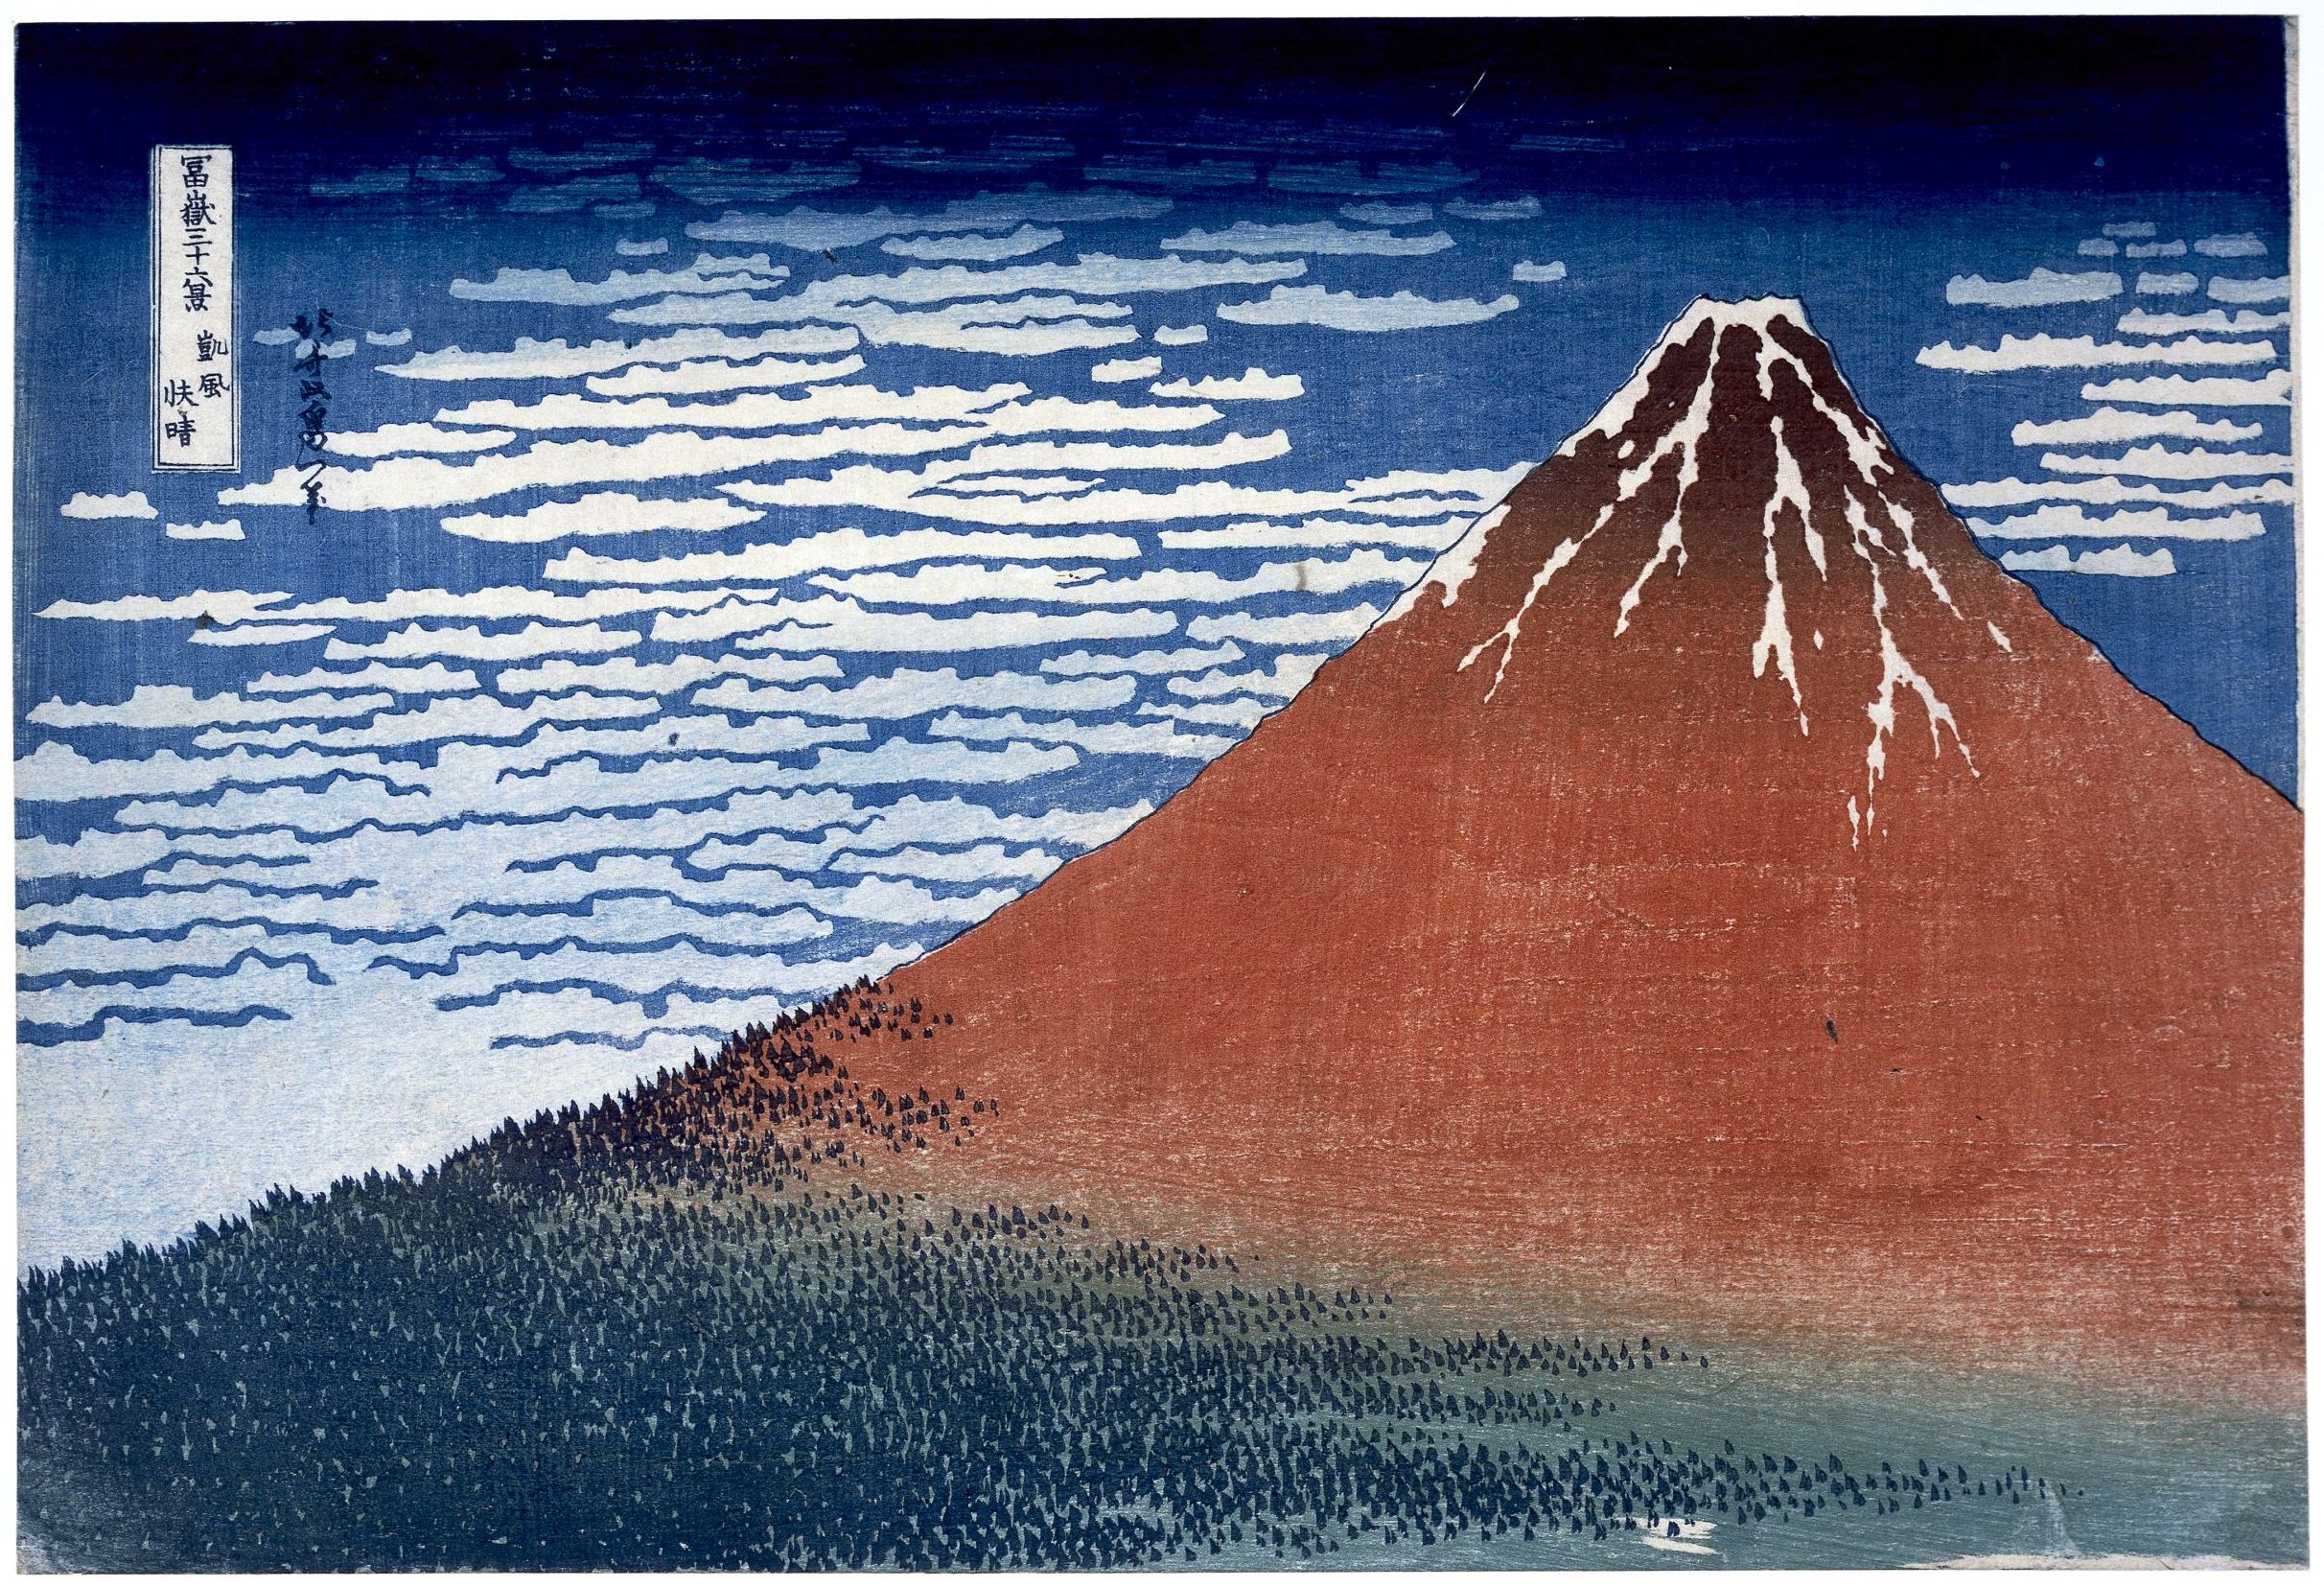 Katsushika Hokusai. South Wind, Clear Sky, also known as Red Fuji, from the series Thirty-six Views of Mount Fuji